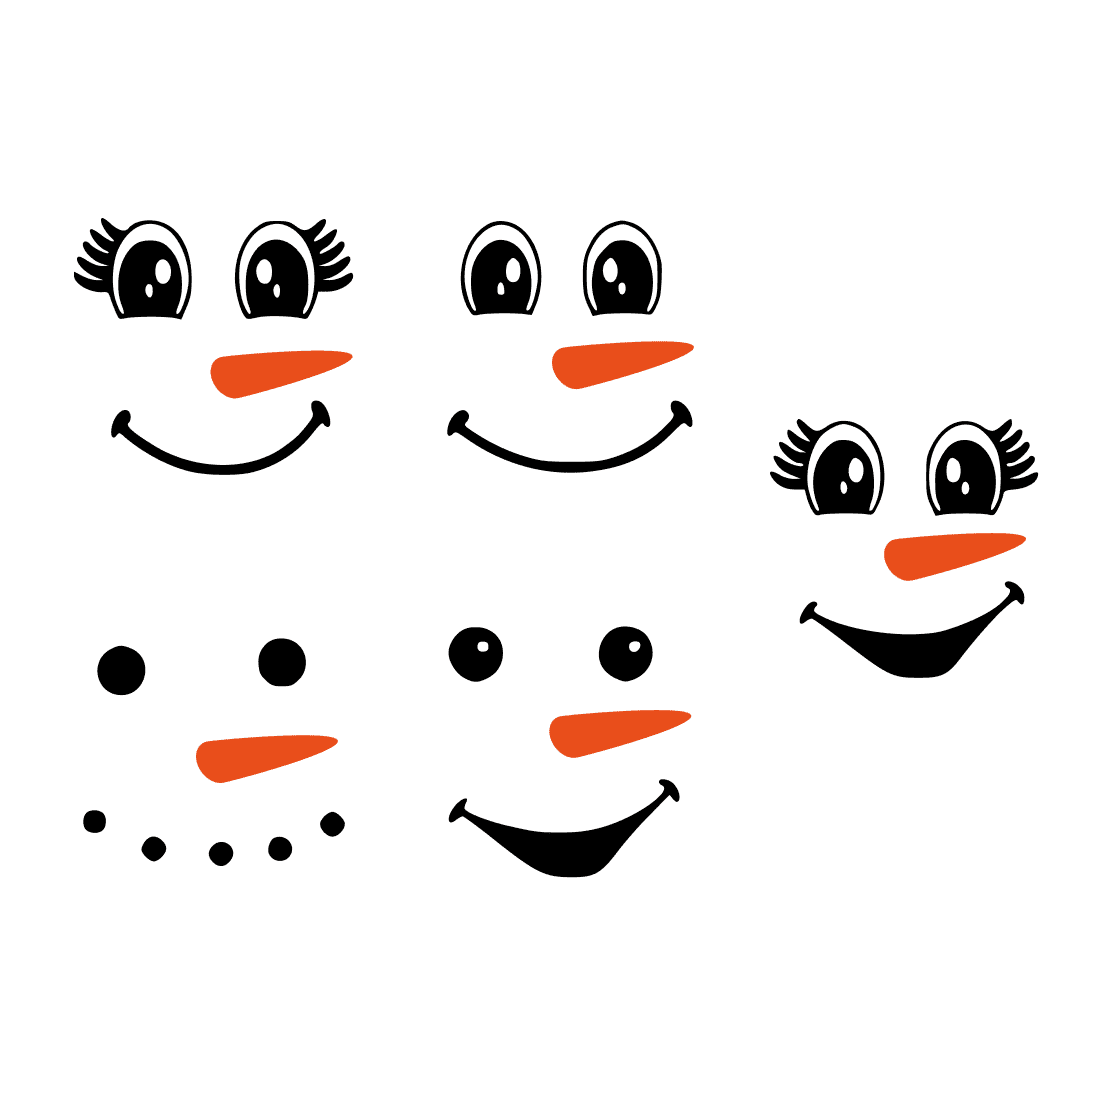 Images of snowman faces with big eyes, coal mouths and carrot noses.